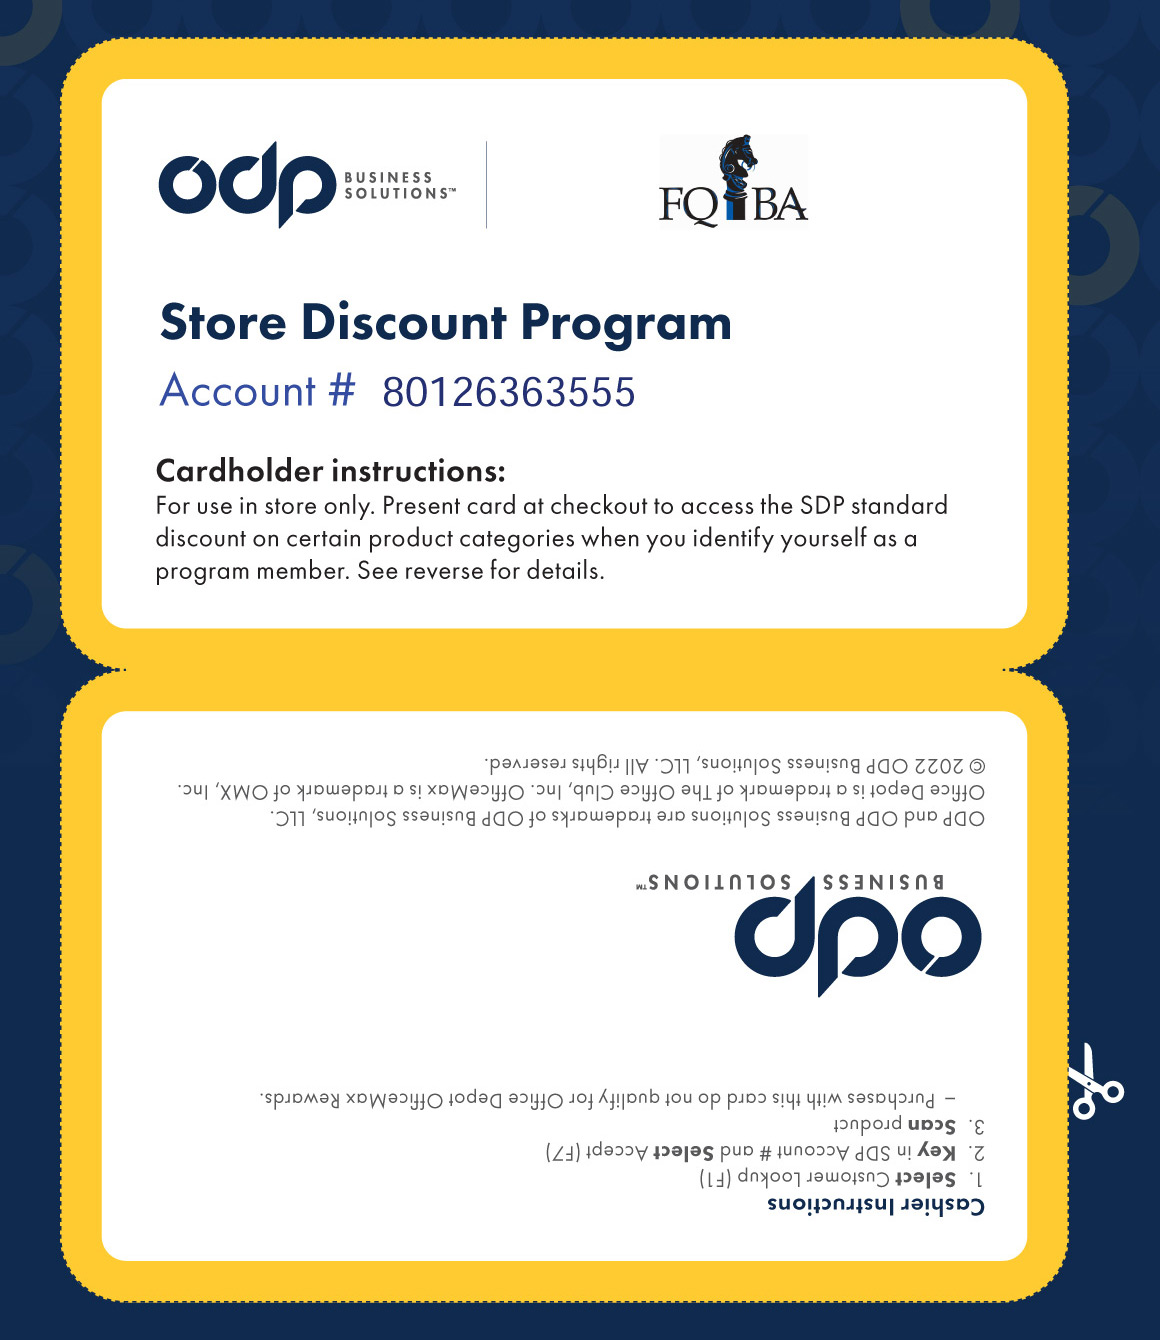 ODP Business Solutions – French Quarter Business Association